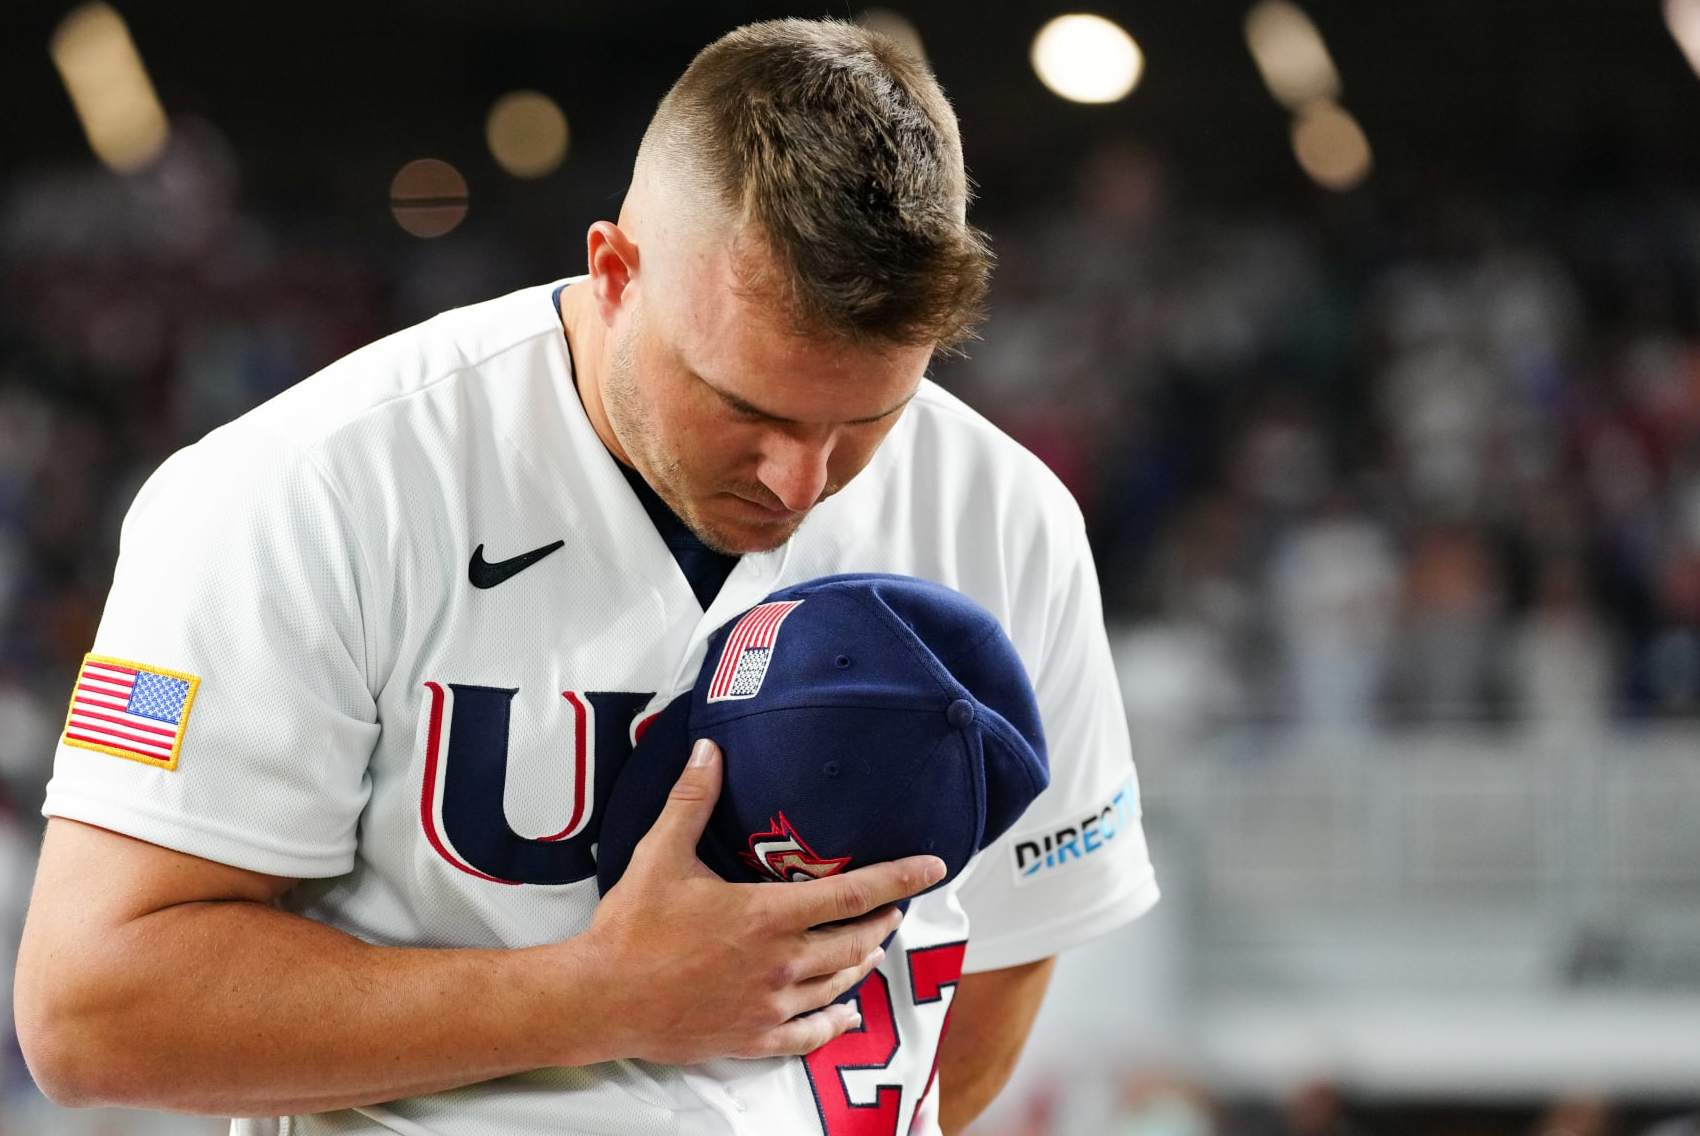 Angels' Mike Trout Plans to Play for Team USA in 2026 World